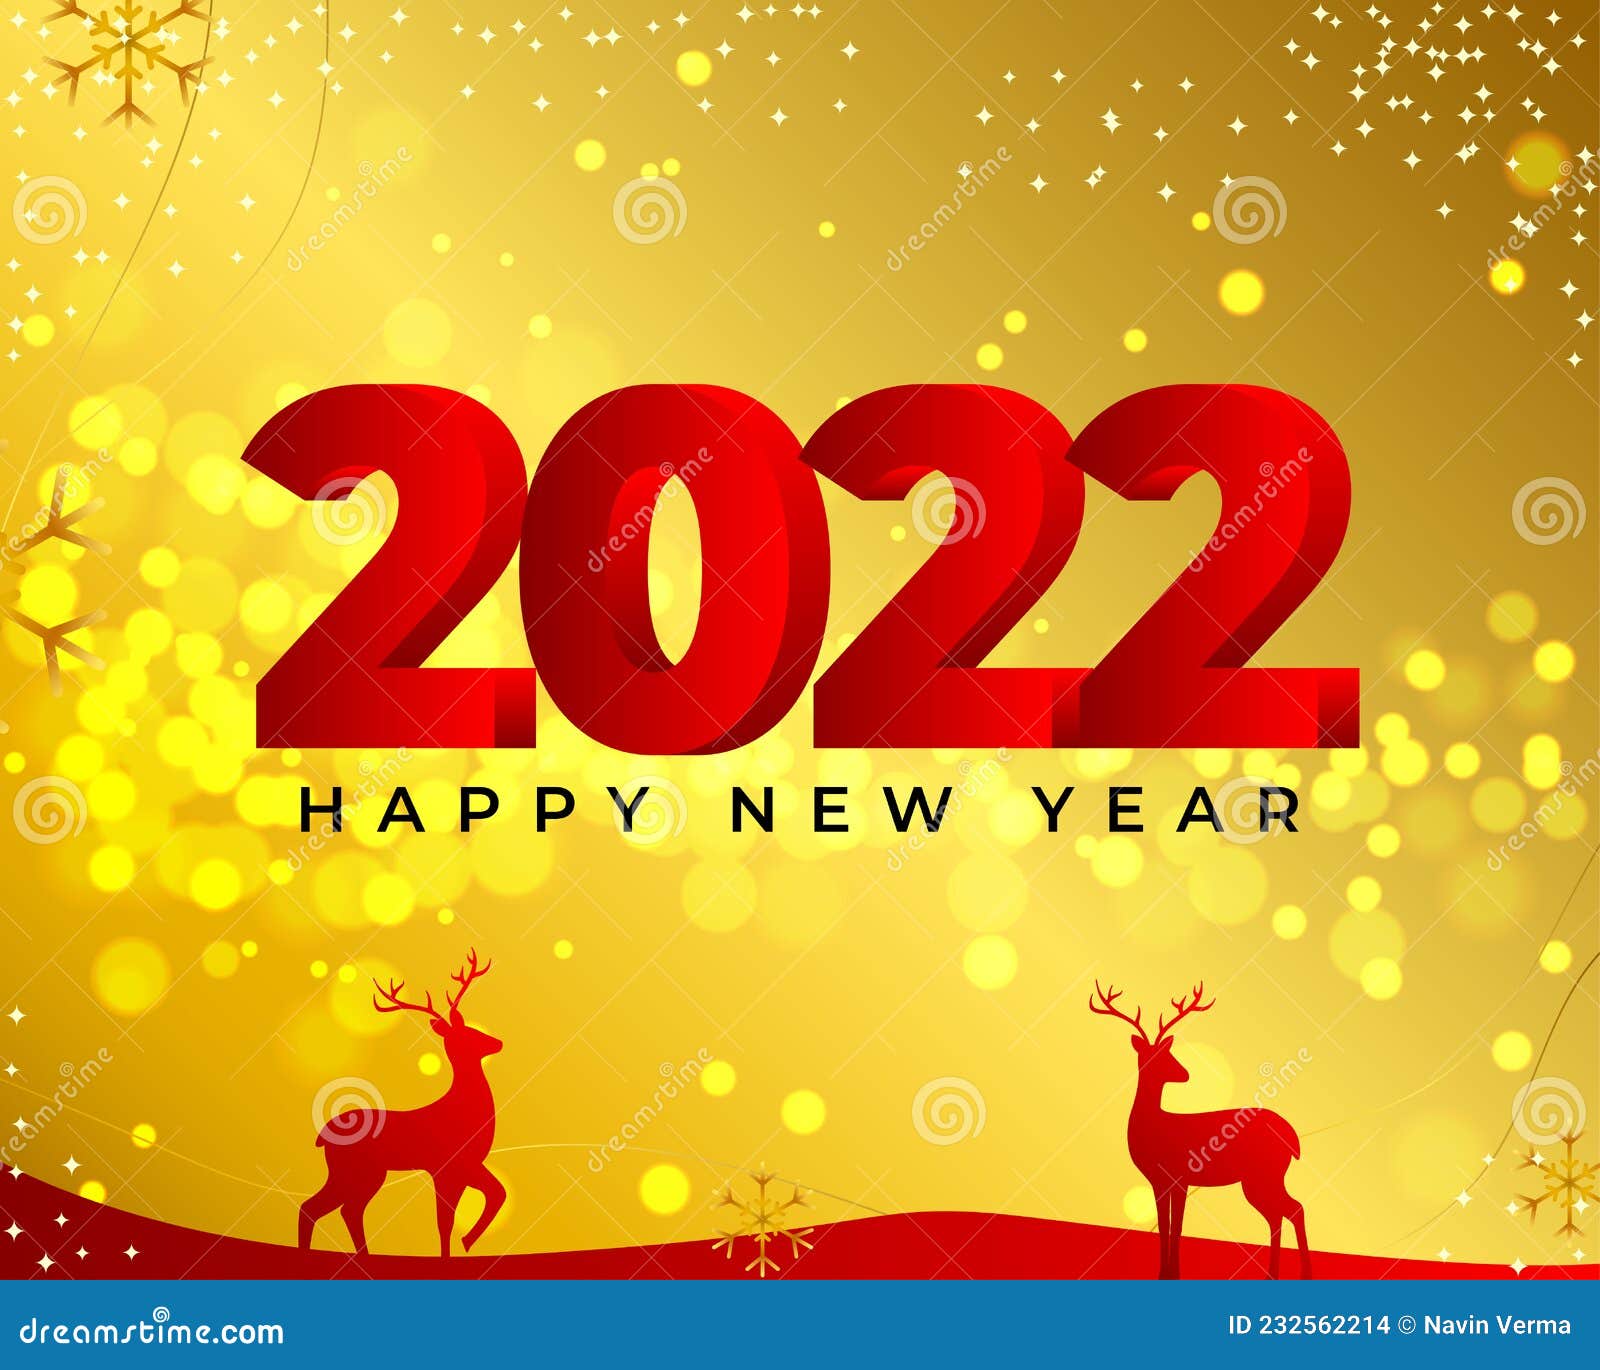 Vector Happy New Year 2022 Banner Greeting Card Stock Vector - Illustration  of cover, december: 232562214